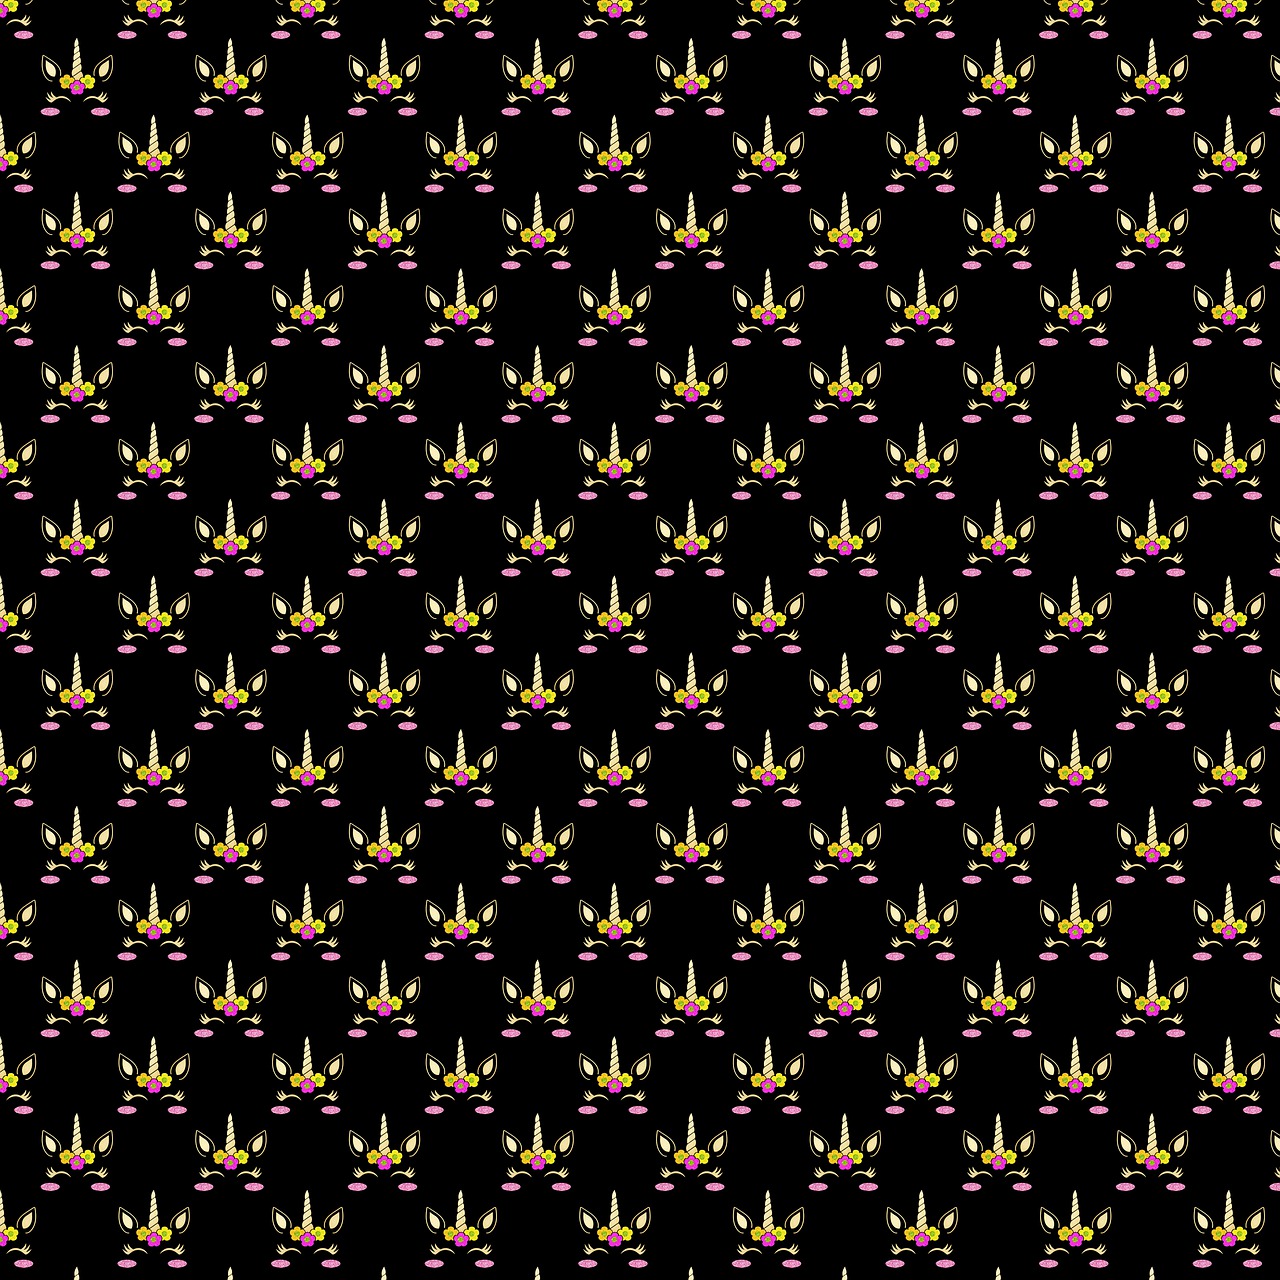 a pattern of flowers on a black background, inspired by Lubin Baugin, generative art, french fry pattern ambience, checkered spiked hair, small flames, wallpaper!